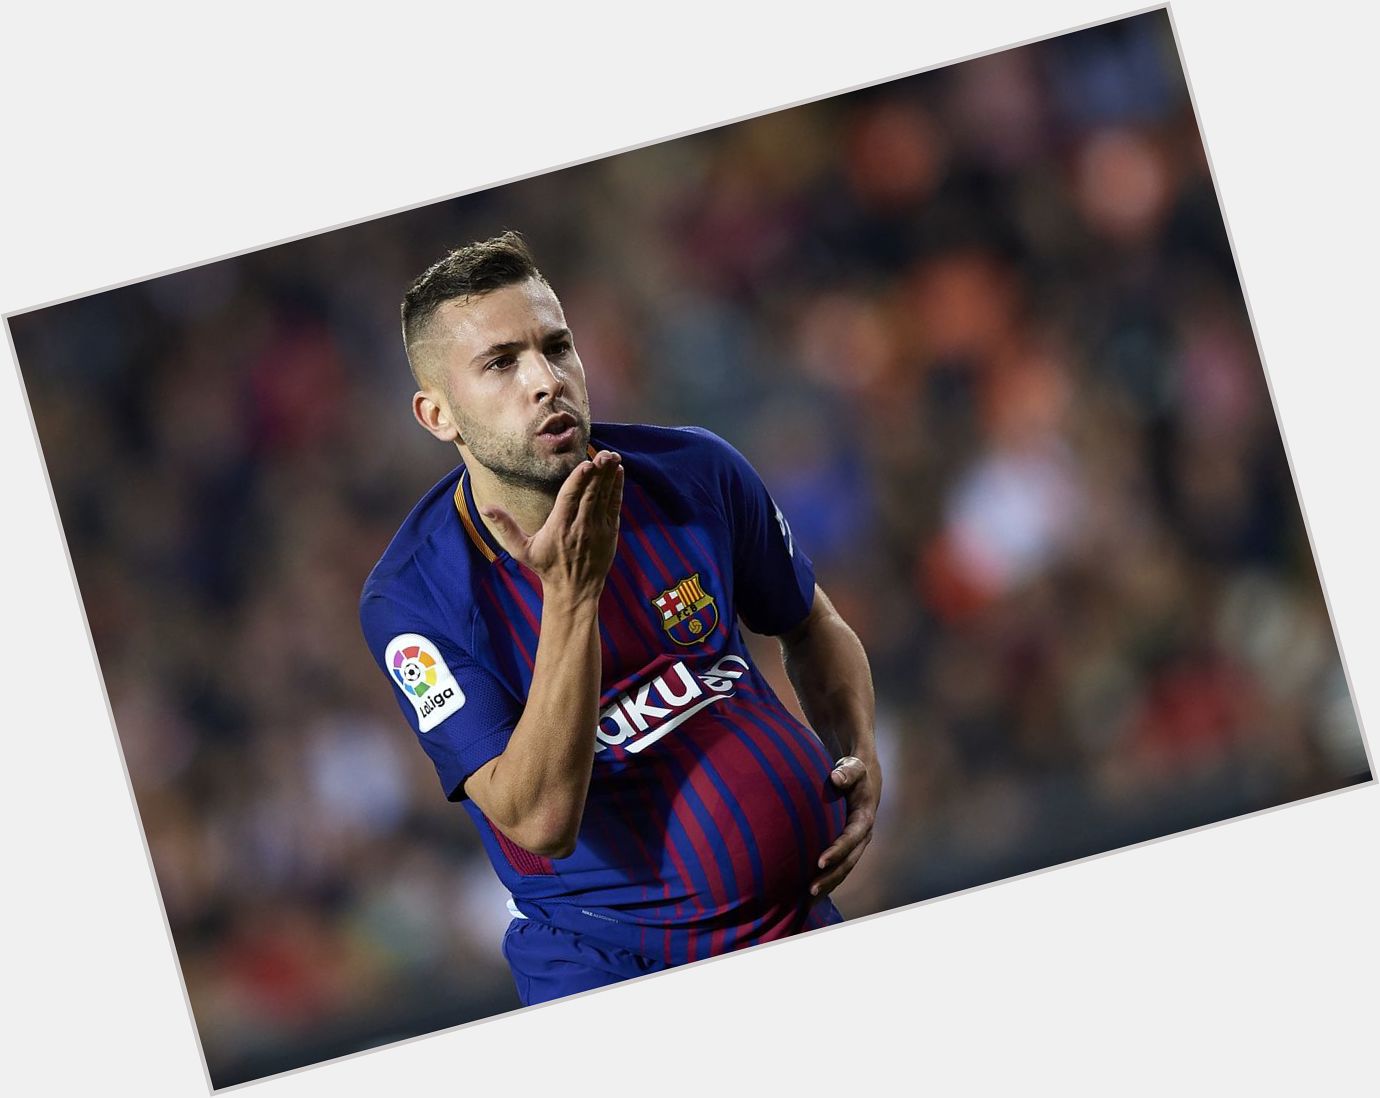 Happy Birthday to Jordi Alba who turns 29 today! He\s been brilliant for us so far this season! 

The rocket. 